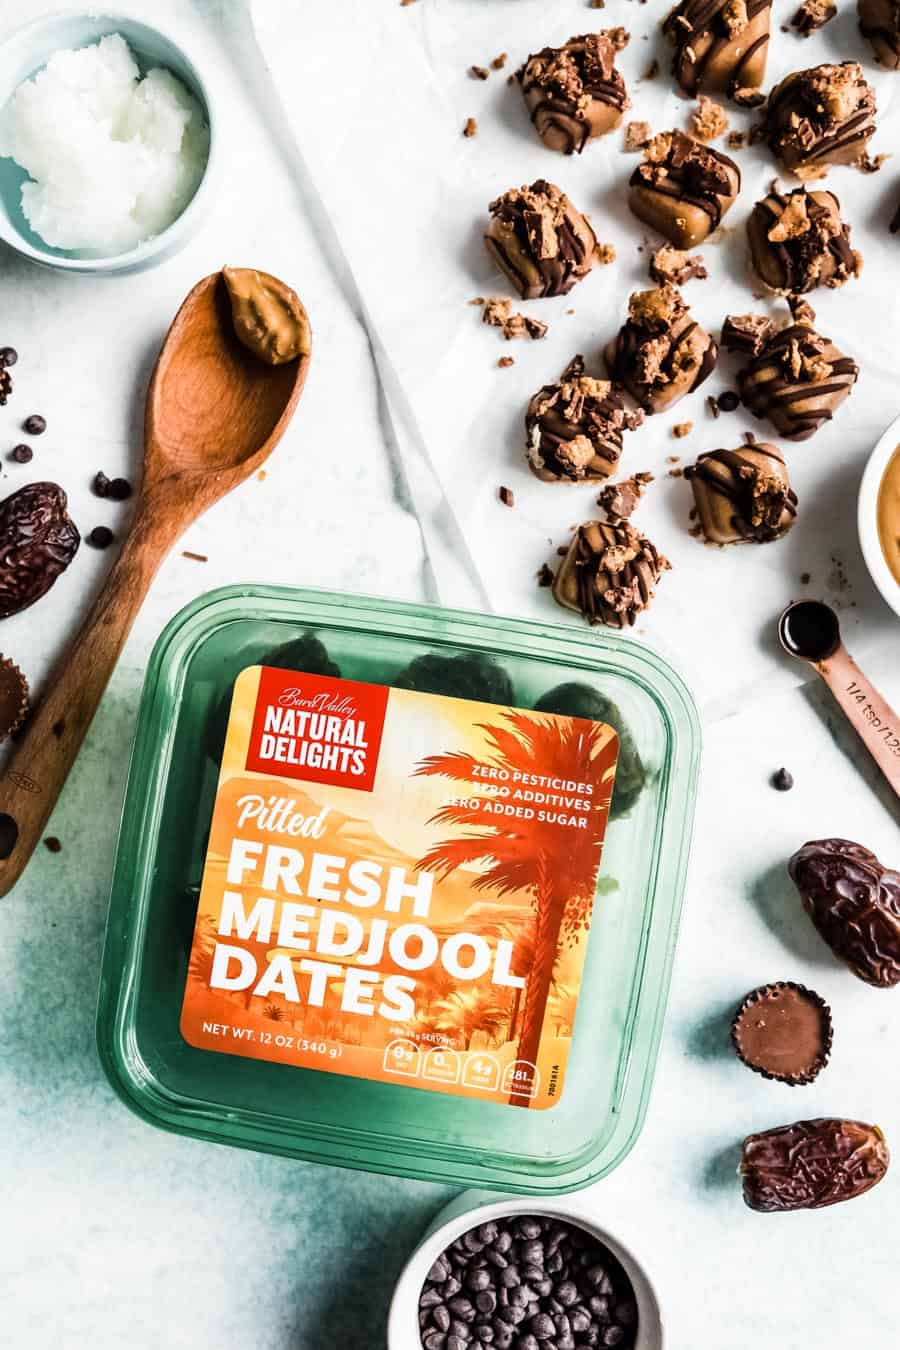 natural delights medjool dates box next to no bake dessert squares and other ingredients.